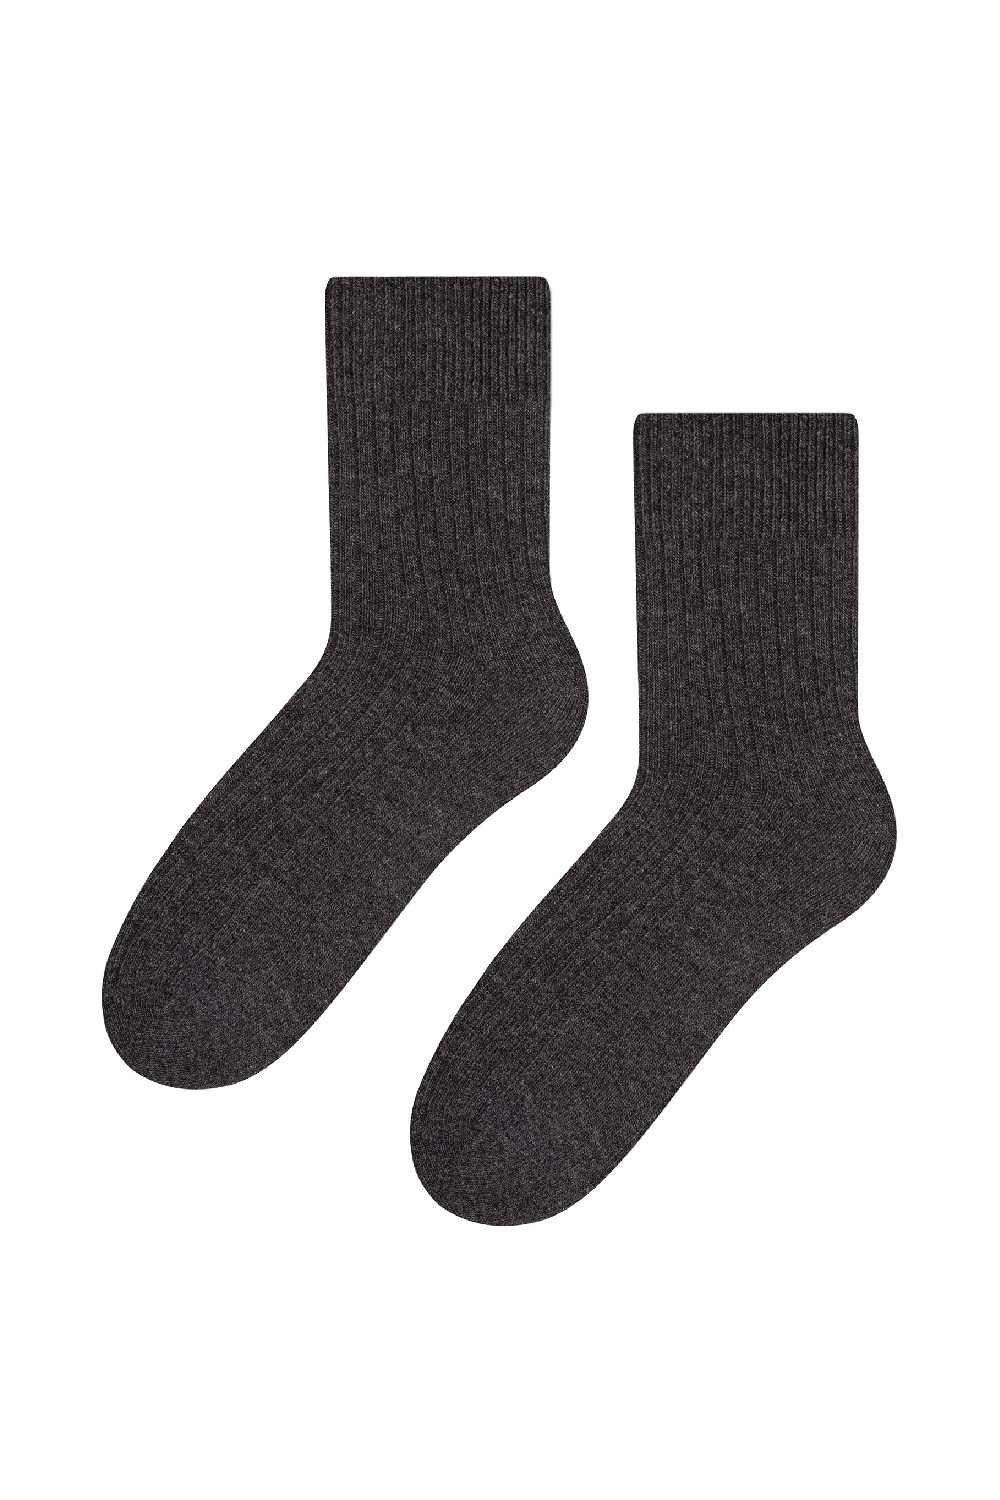 Wool Dress Knitted Ribbed Mid-Calf Warm Socks for Winter